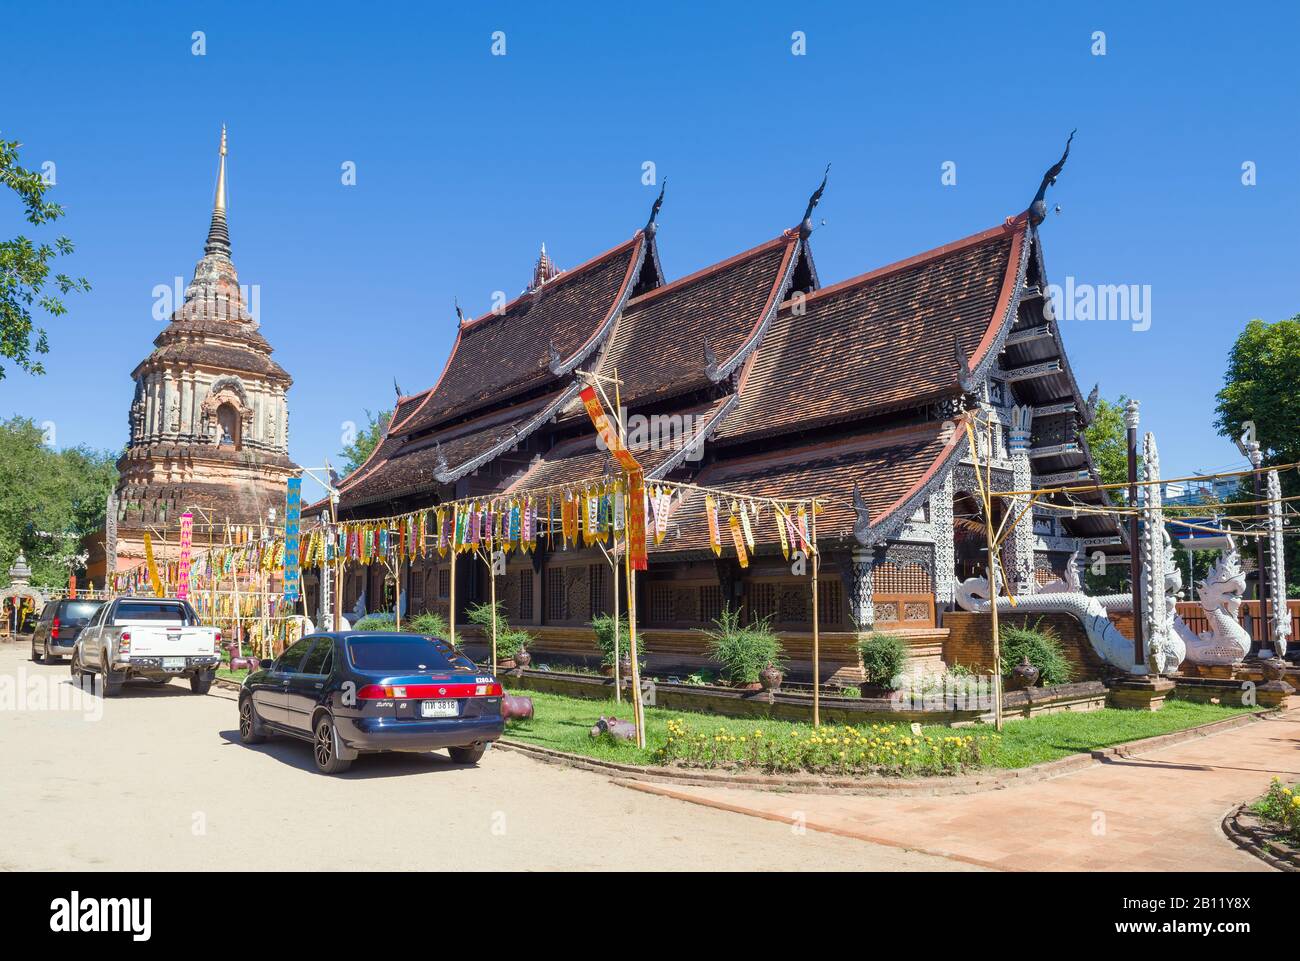 CHIANG MAY, THAILAND - DECEMBER 22, 2018: Sunny day on the ancient Buddhist temple Wat Lokmolee Stock Photo